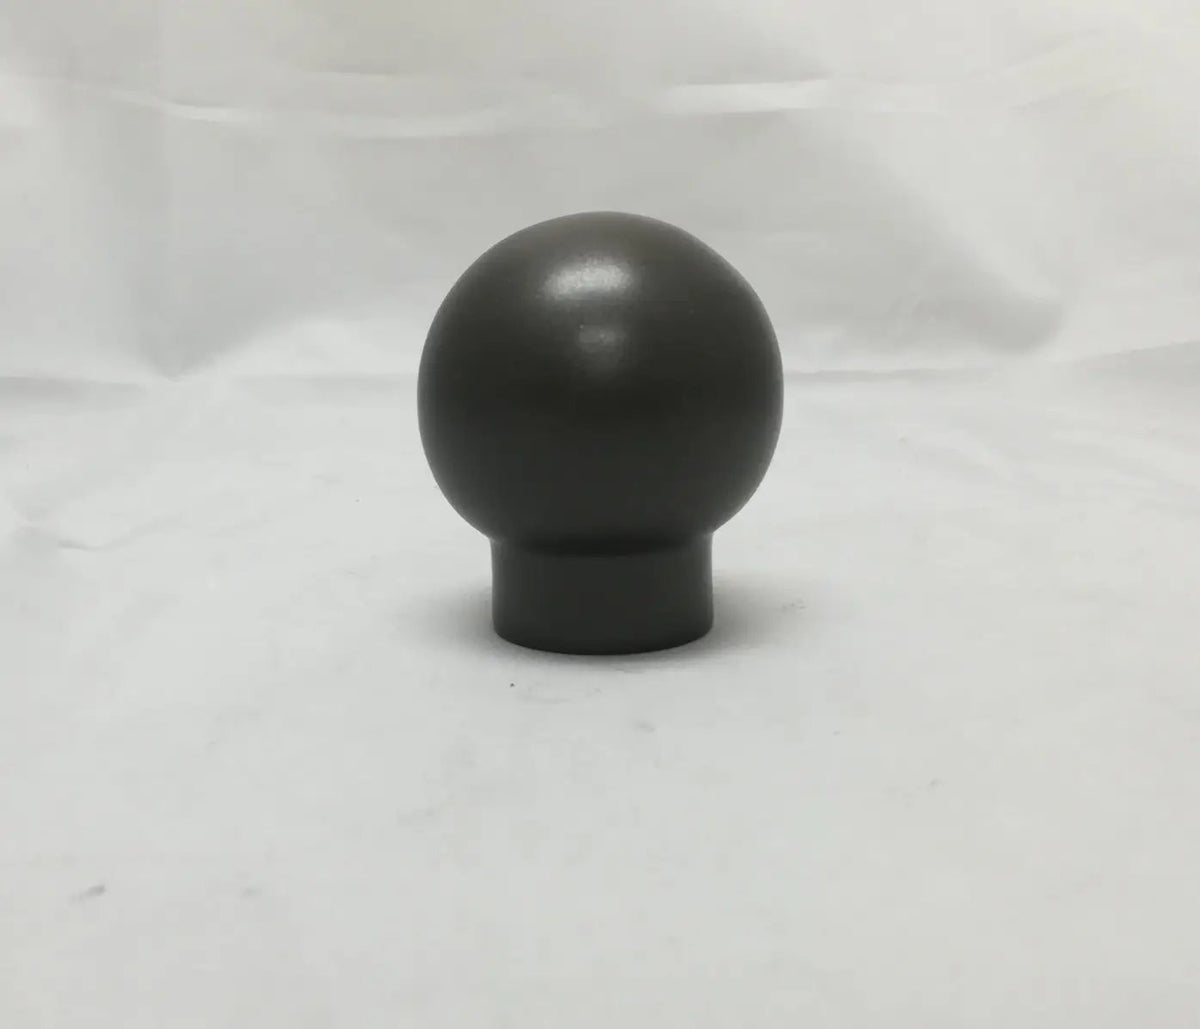 Single Outlet Ball for 1" Tubing - Trade Diversified